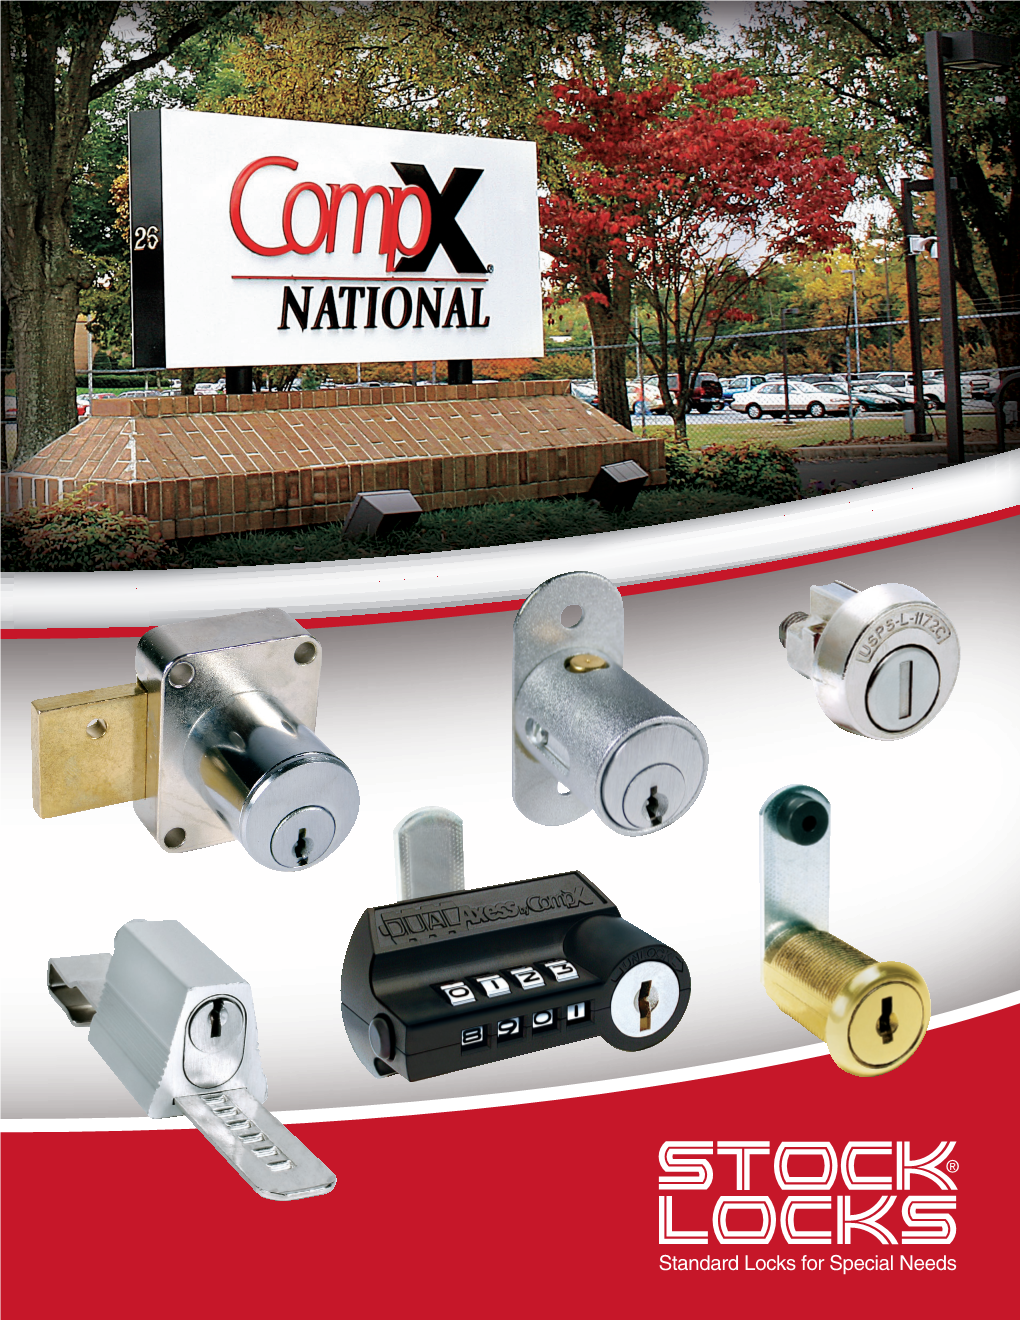 (NEW!) Compx National